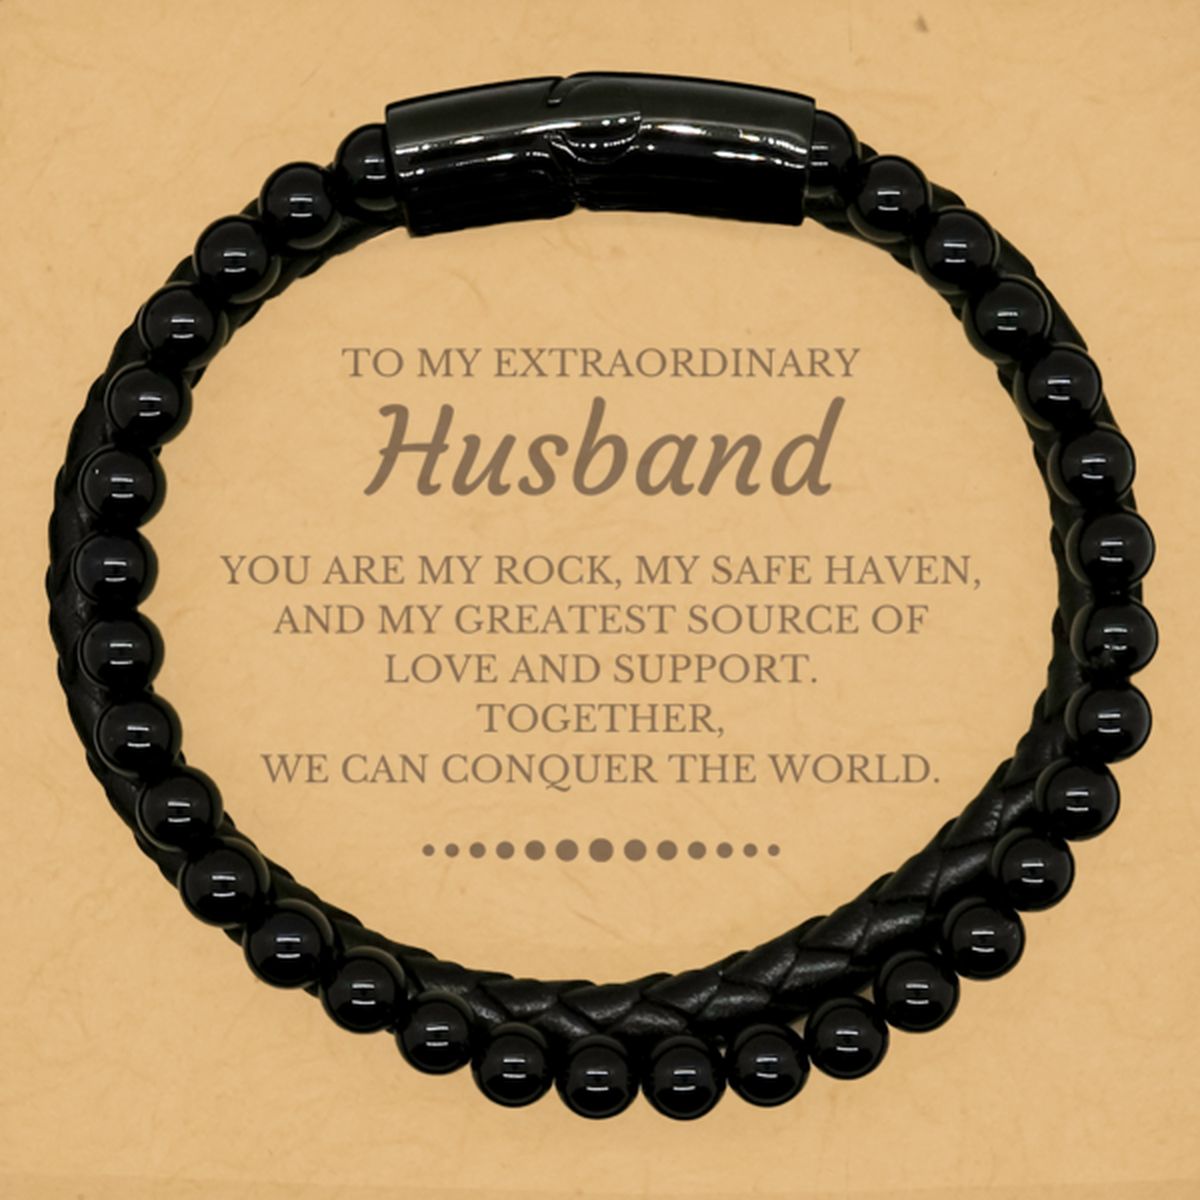 To My Extraordinary Husband Gifts, Together, we can conquer the world, Birthday Stone Leather Bracelets For Husband, Christmas Gifts For Husband